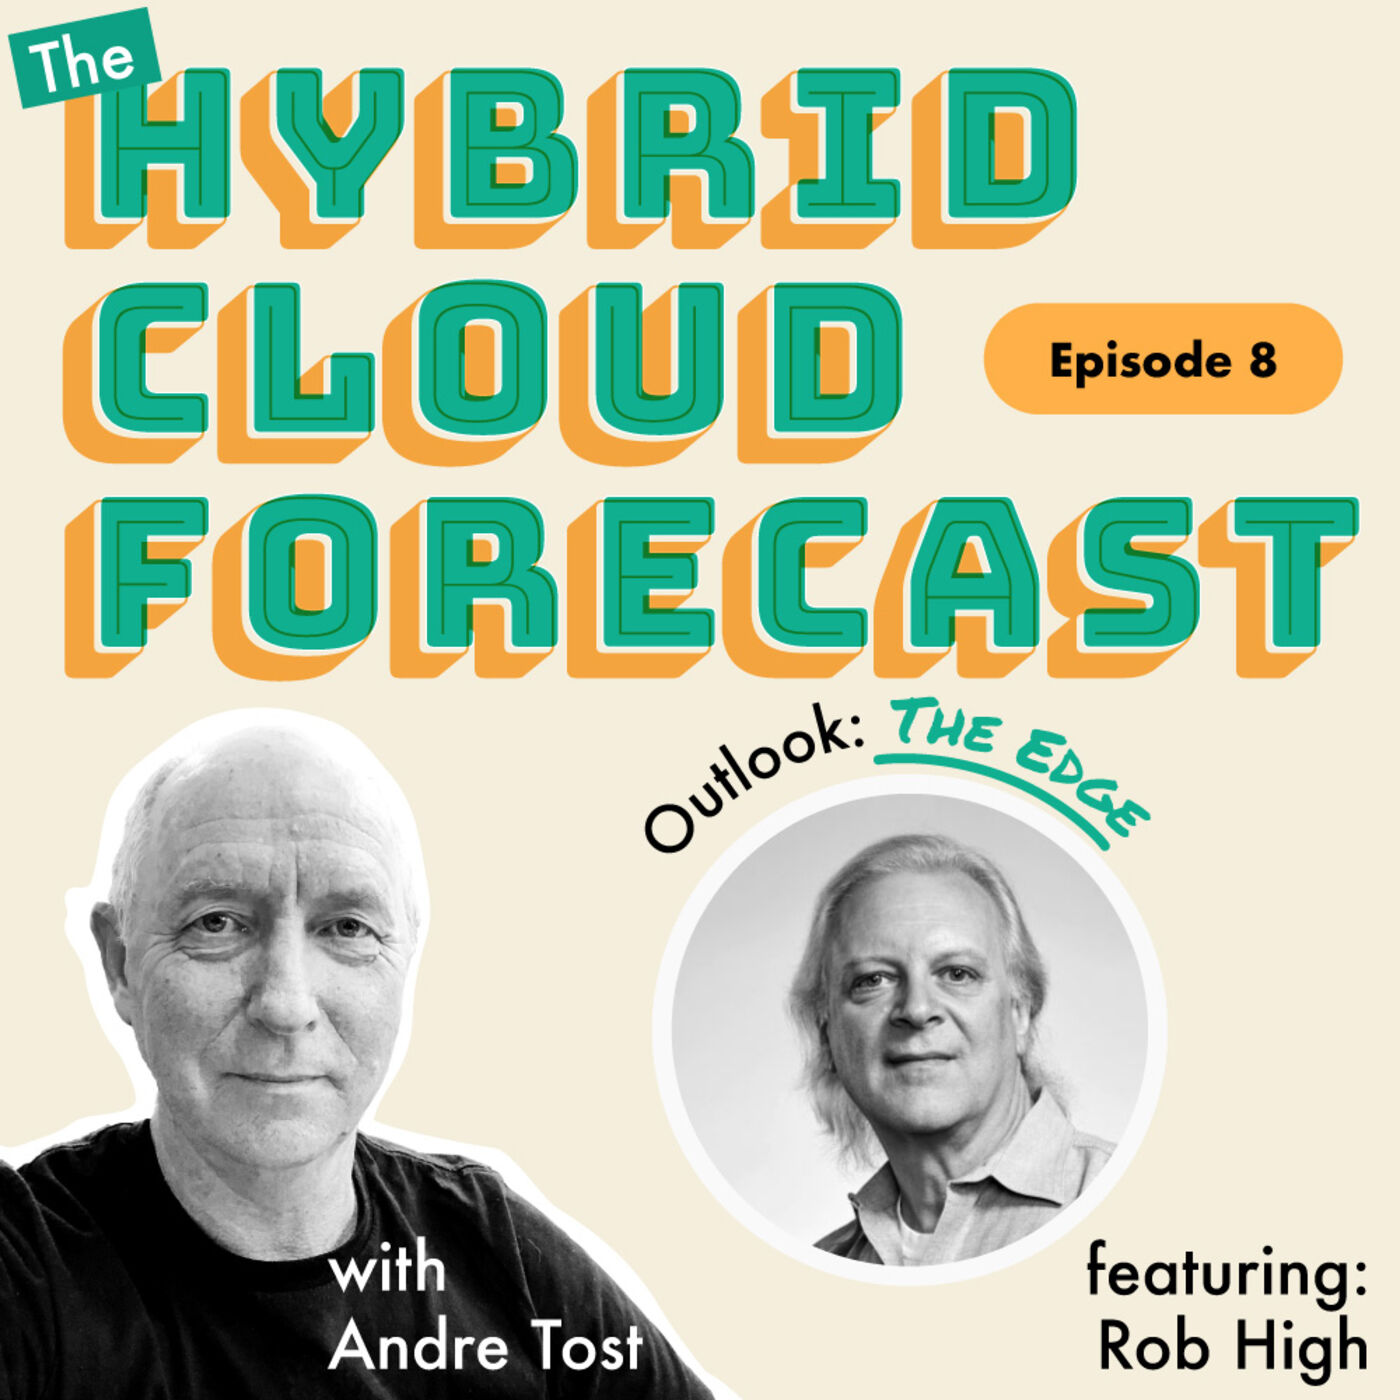 Episode 8: The Hybrid Cloud Forecast - Outlook: The Edge